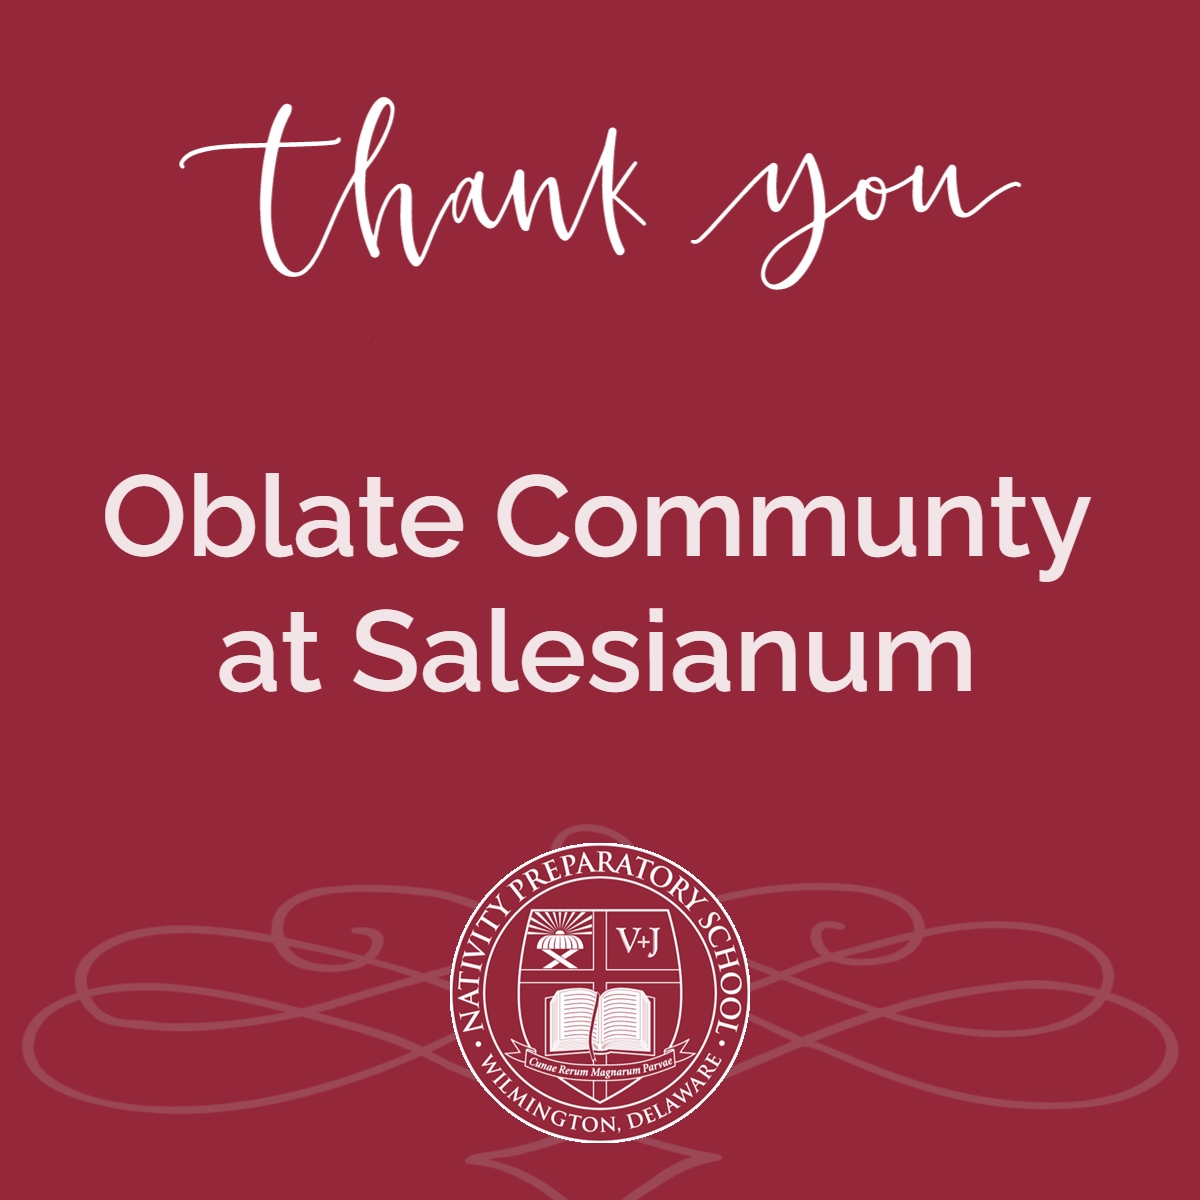 Oblate Community at Salesianum